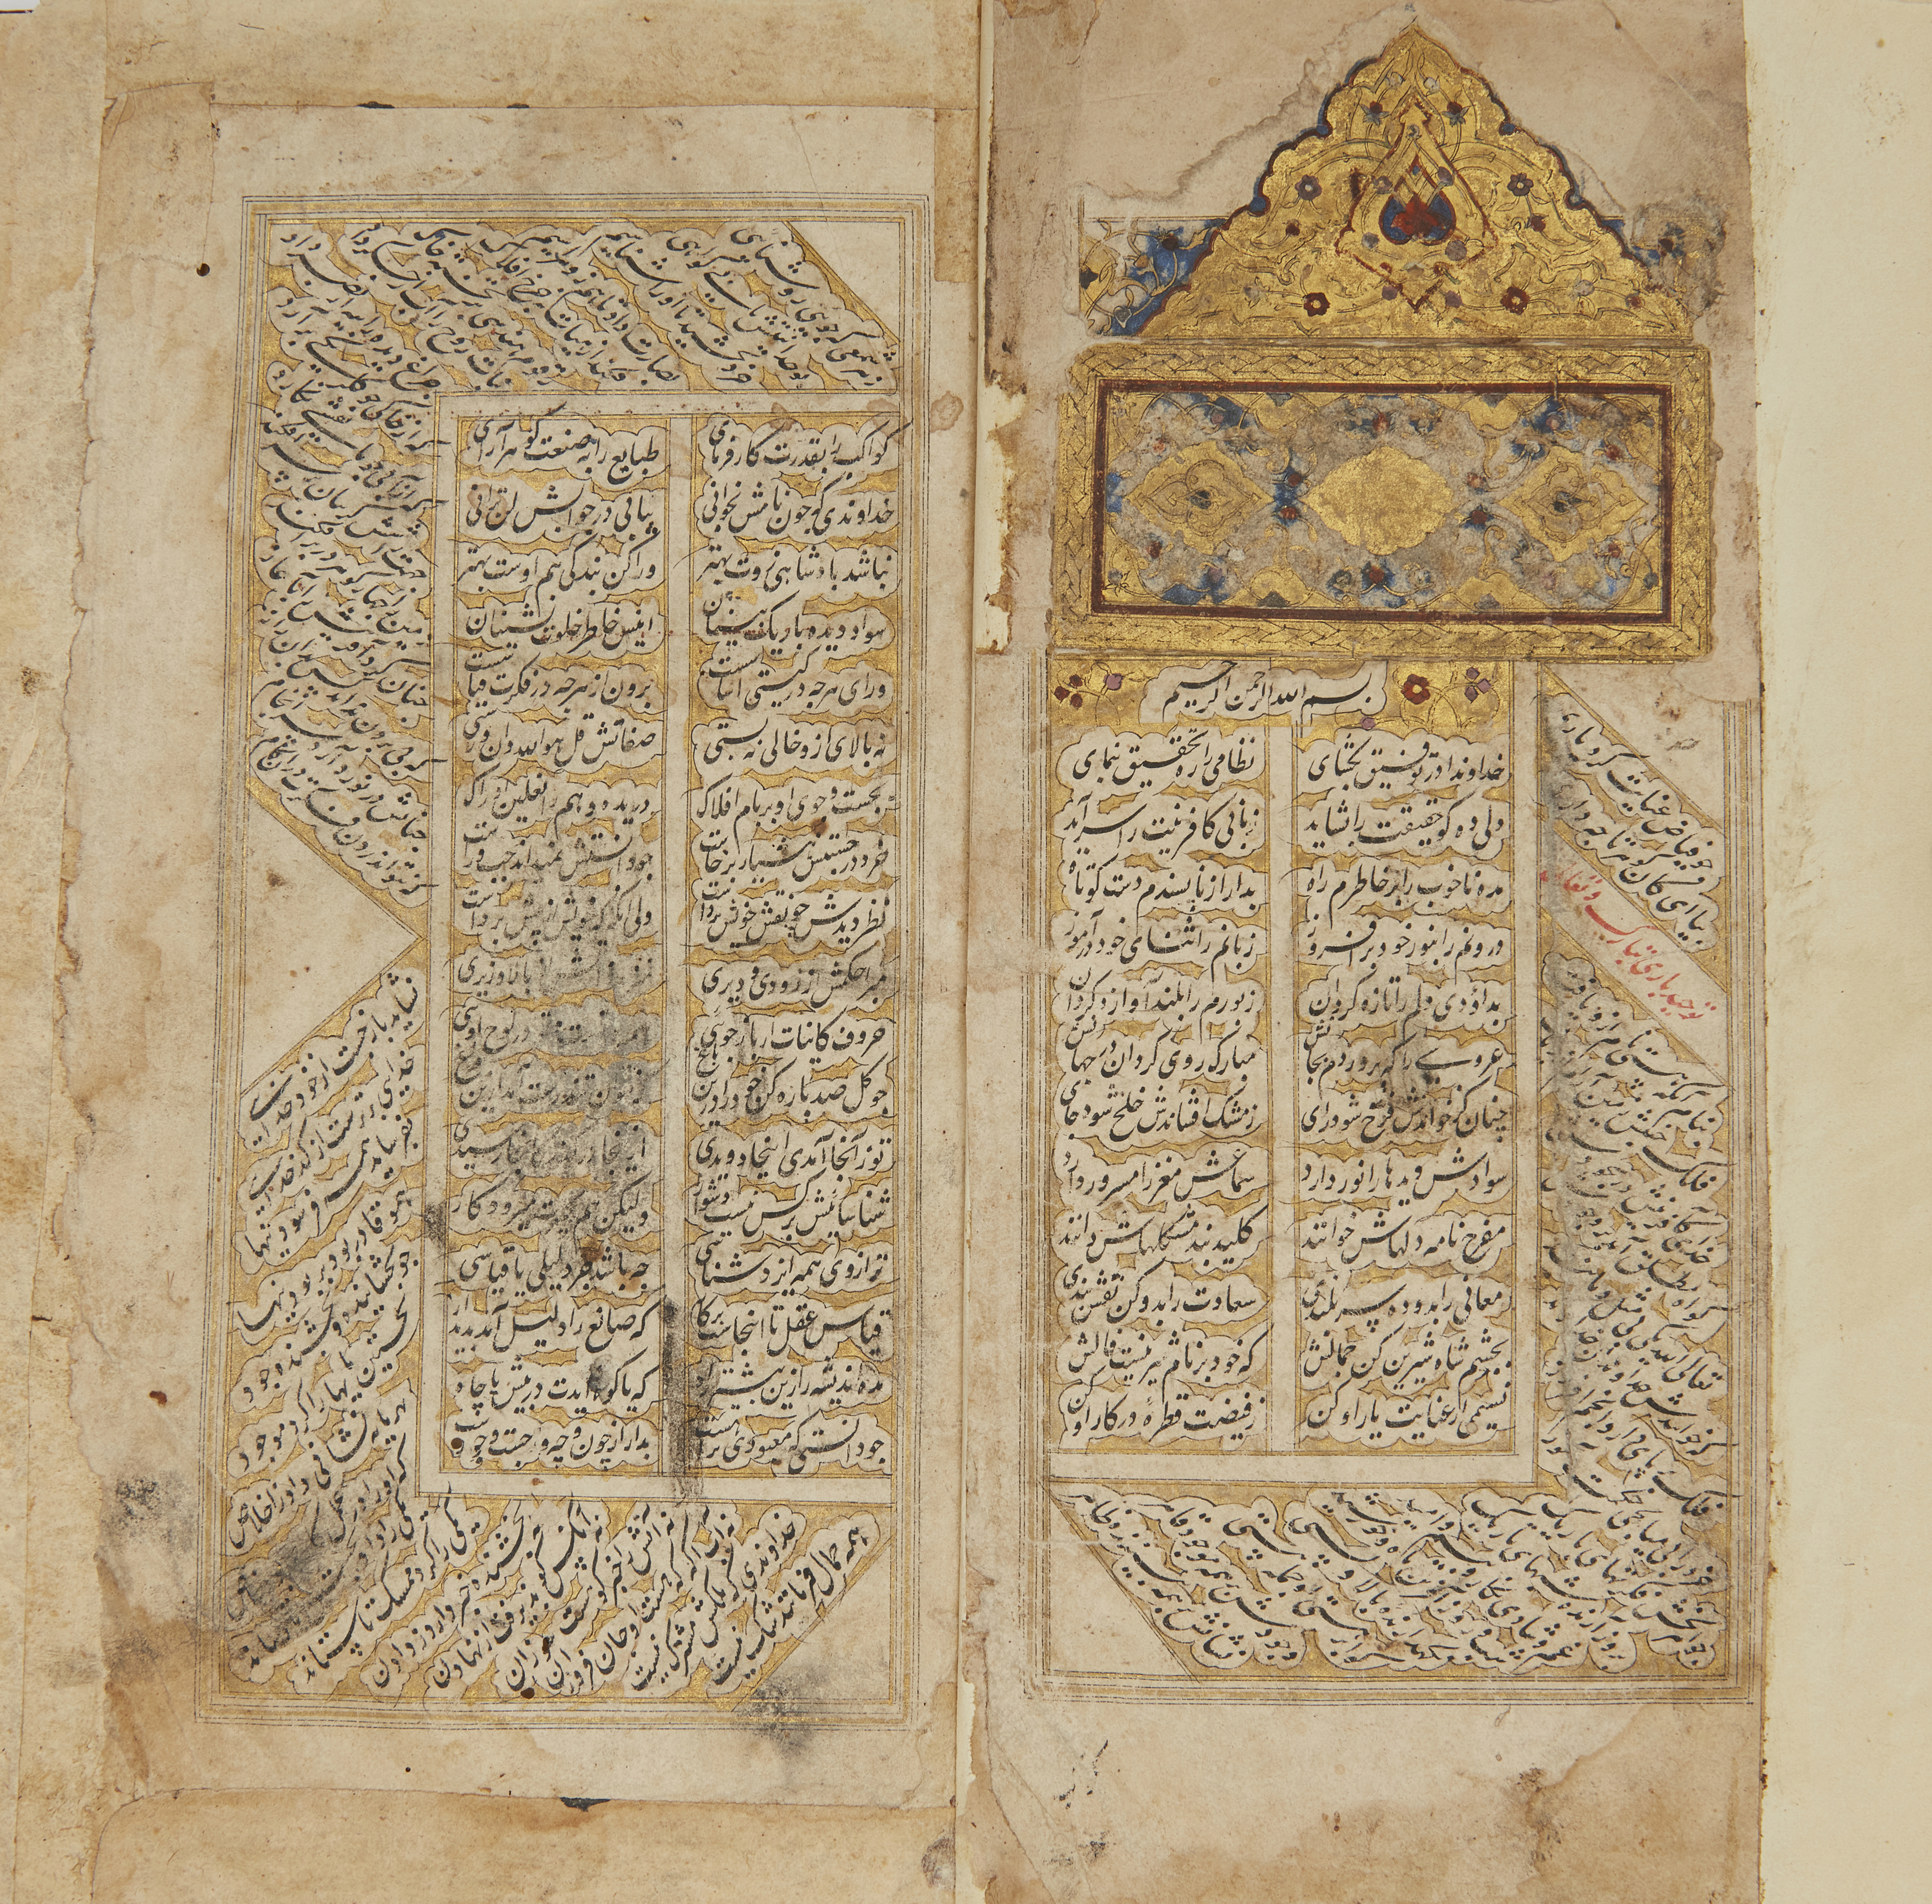 A collection of Persian verses,Safavid Iran, late 17th-early 18th centuryPersian manuscript on pa...